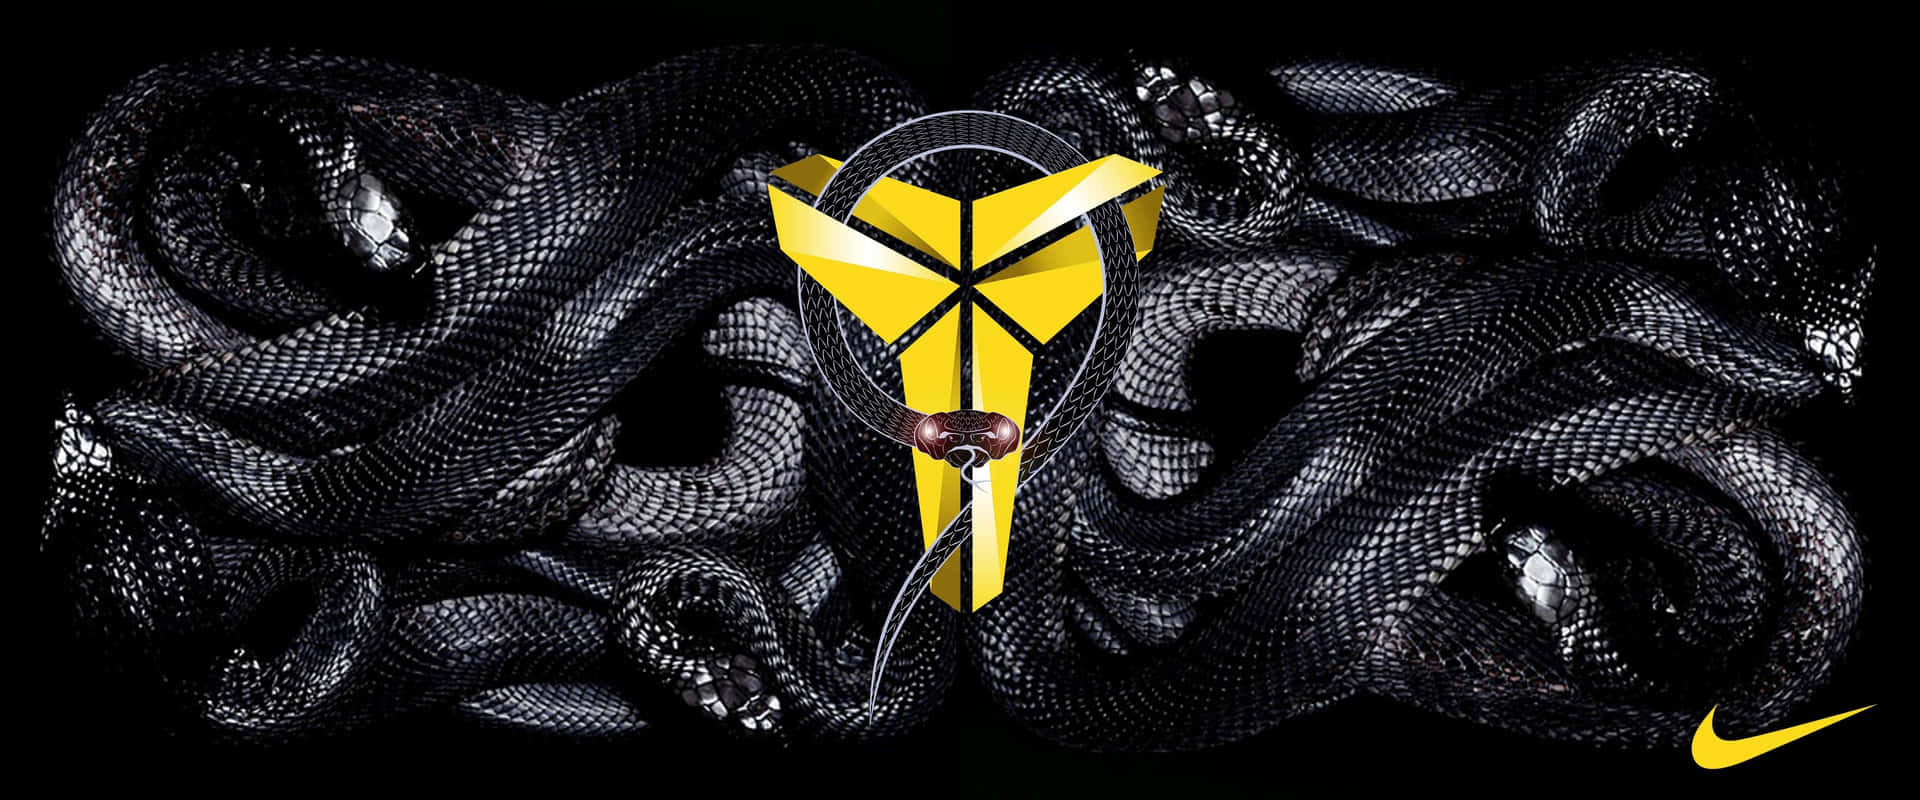 "Black Mamba Kobe: Never Give Up On Your Dreams" Wallpaper